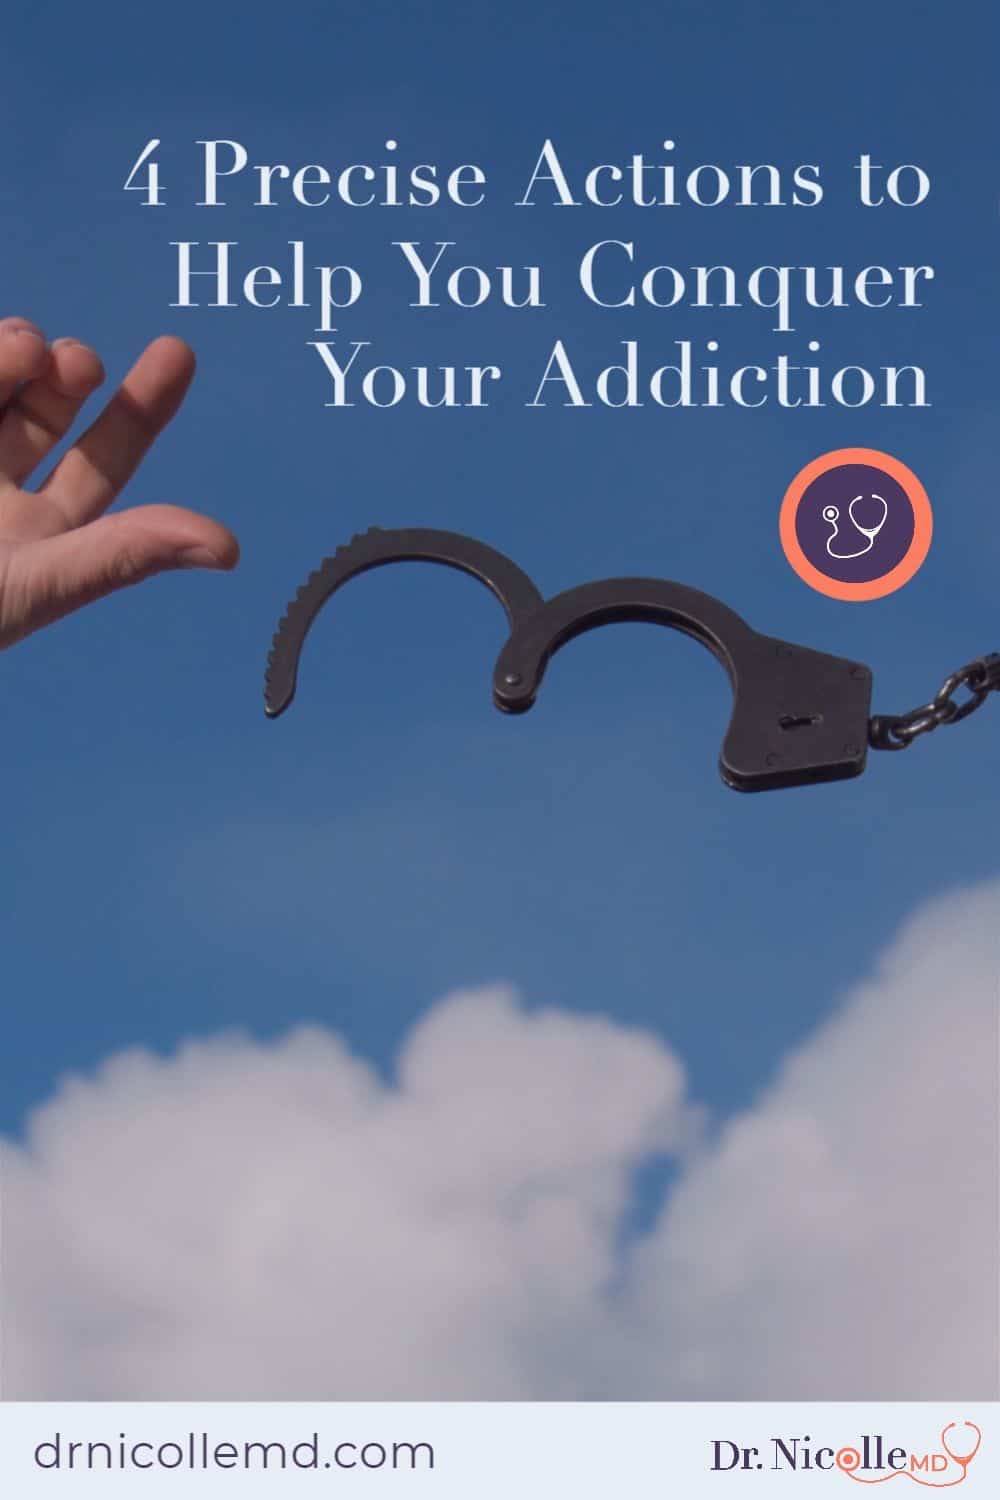 4 Precise Actions to Help You Conquer Your Addiction